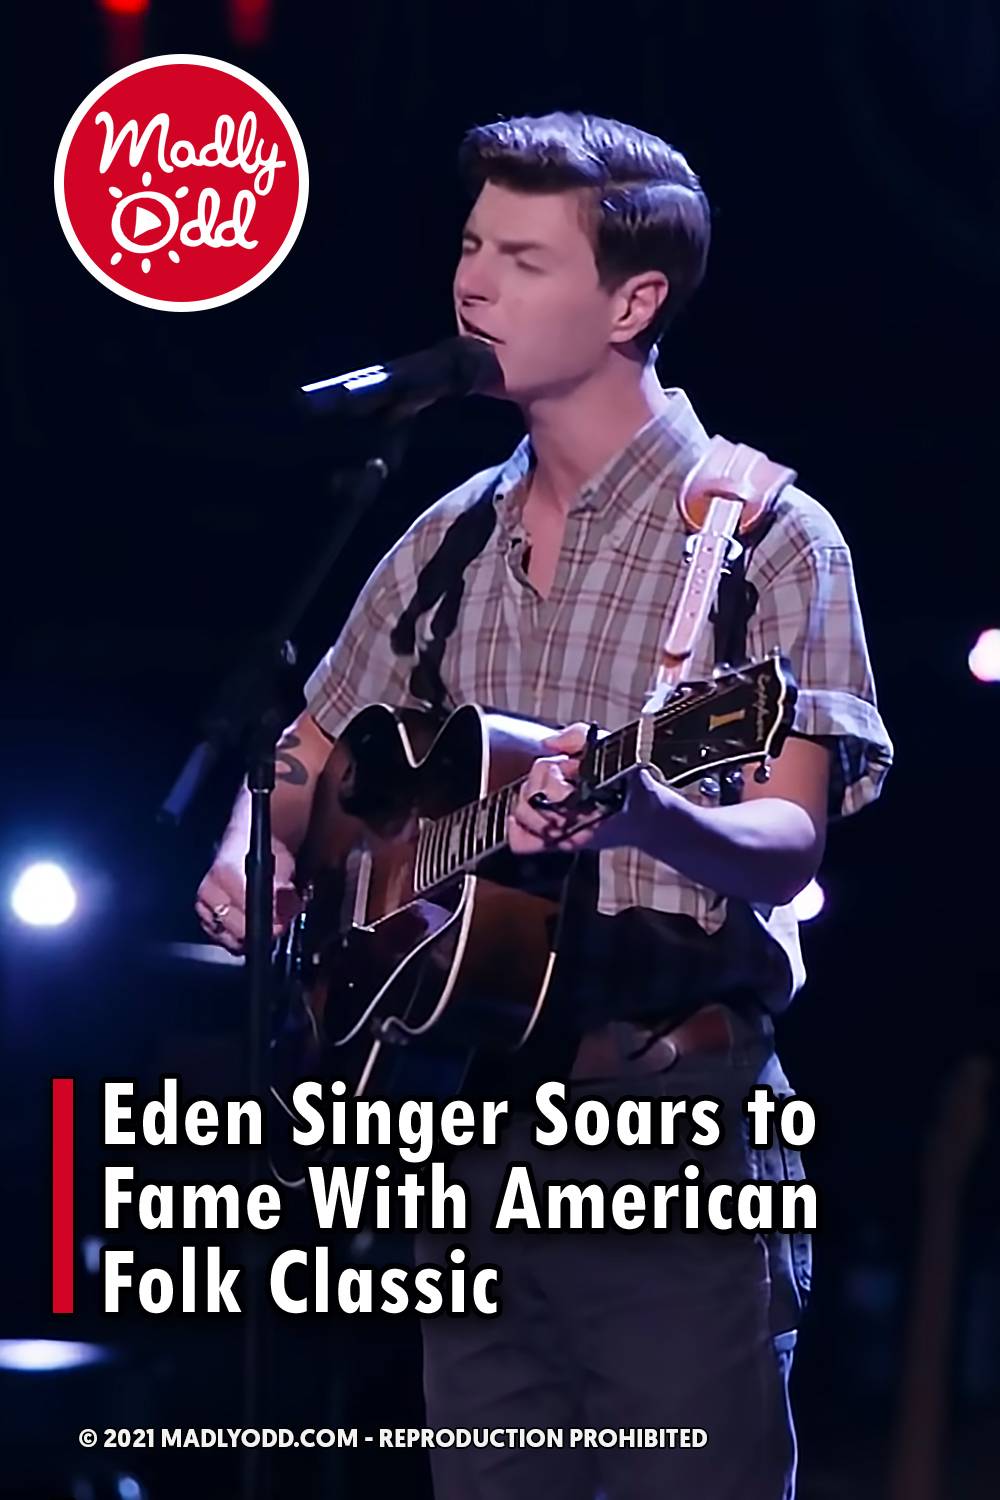 Eden Singer Soars to Fame With American Folk Classic